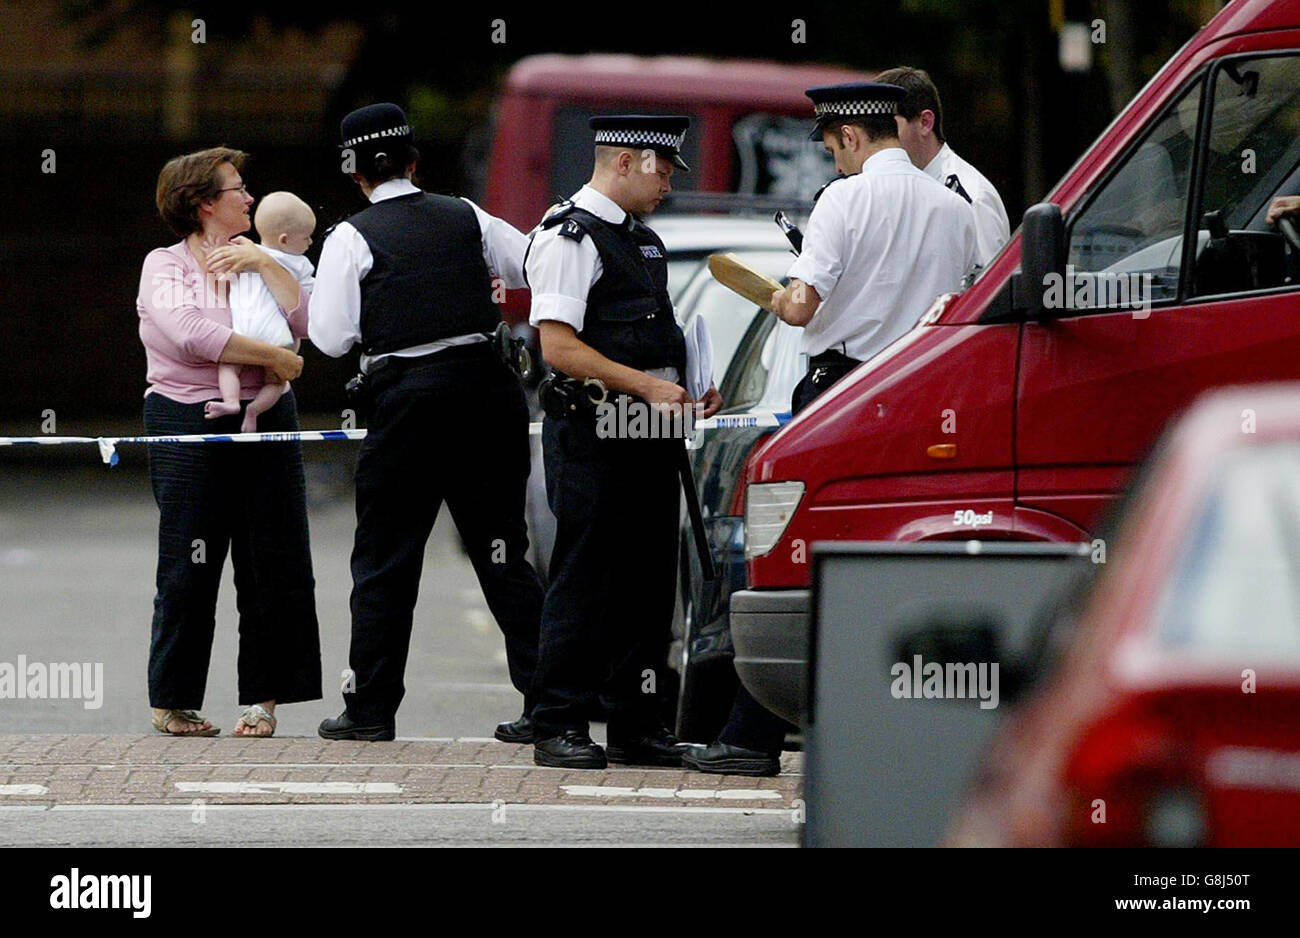 A mother with her baby speaks to police as they raise the cordon, allowing people to return to their homes after sealing off an area of Notting Hill following raids in connection with the attempted bombings last week. Stock Photo